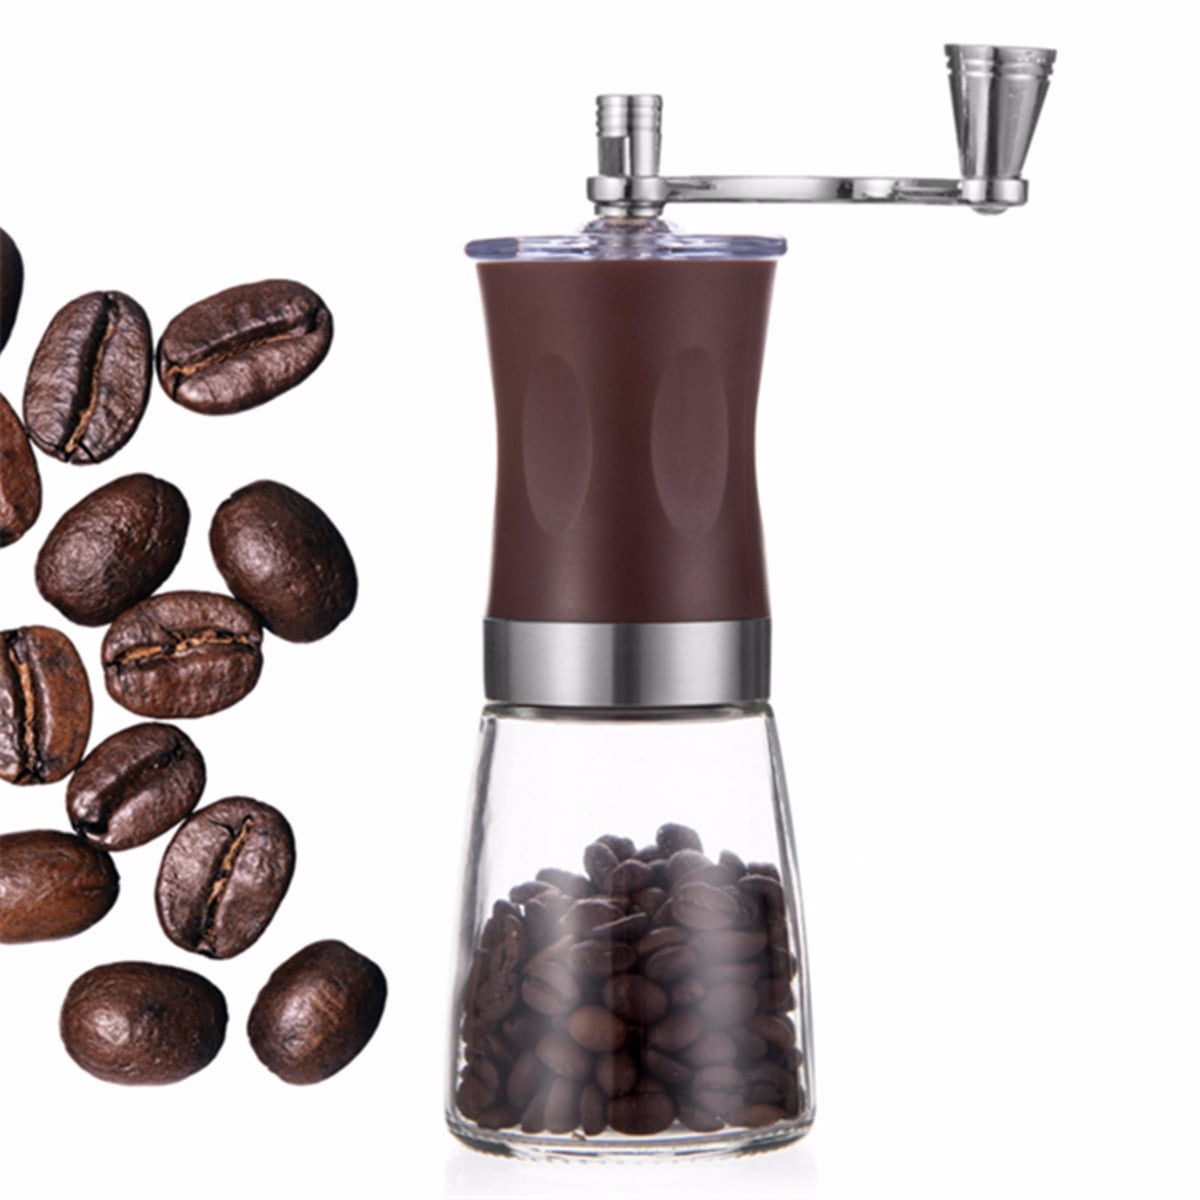 Details about   Mini Stainless Steel Manual Hand Crank Coffee Beans Pepper Seeds Grinder Mill MP 